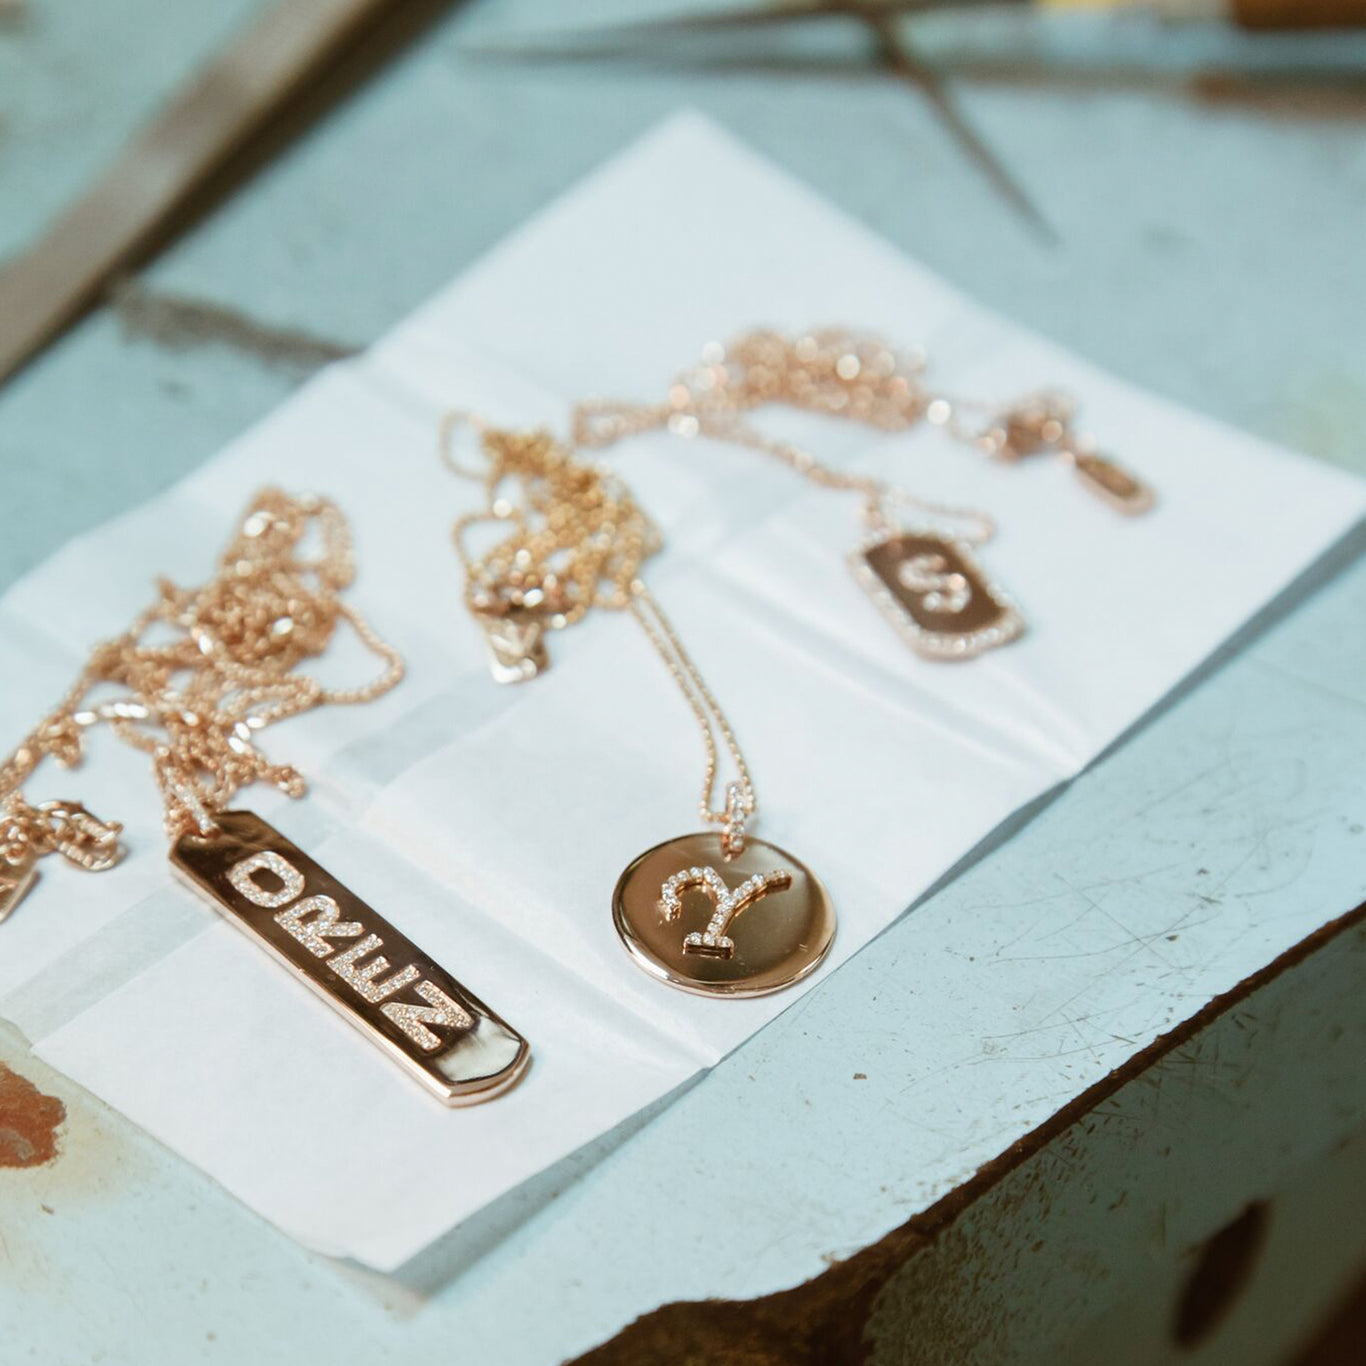 The Renata Necklace shown behind the scenes in production with the Longtag Necklace and Initial Dogtag. All three necklaces are part of our Monogram Collection.